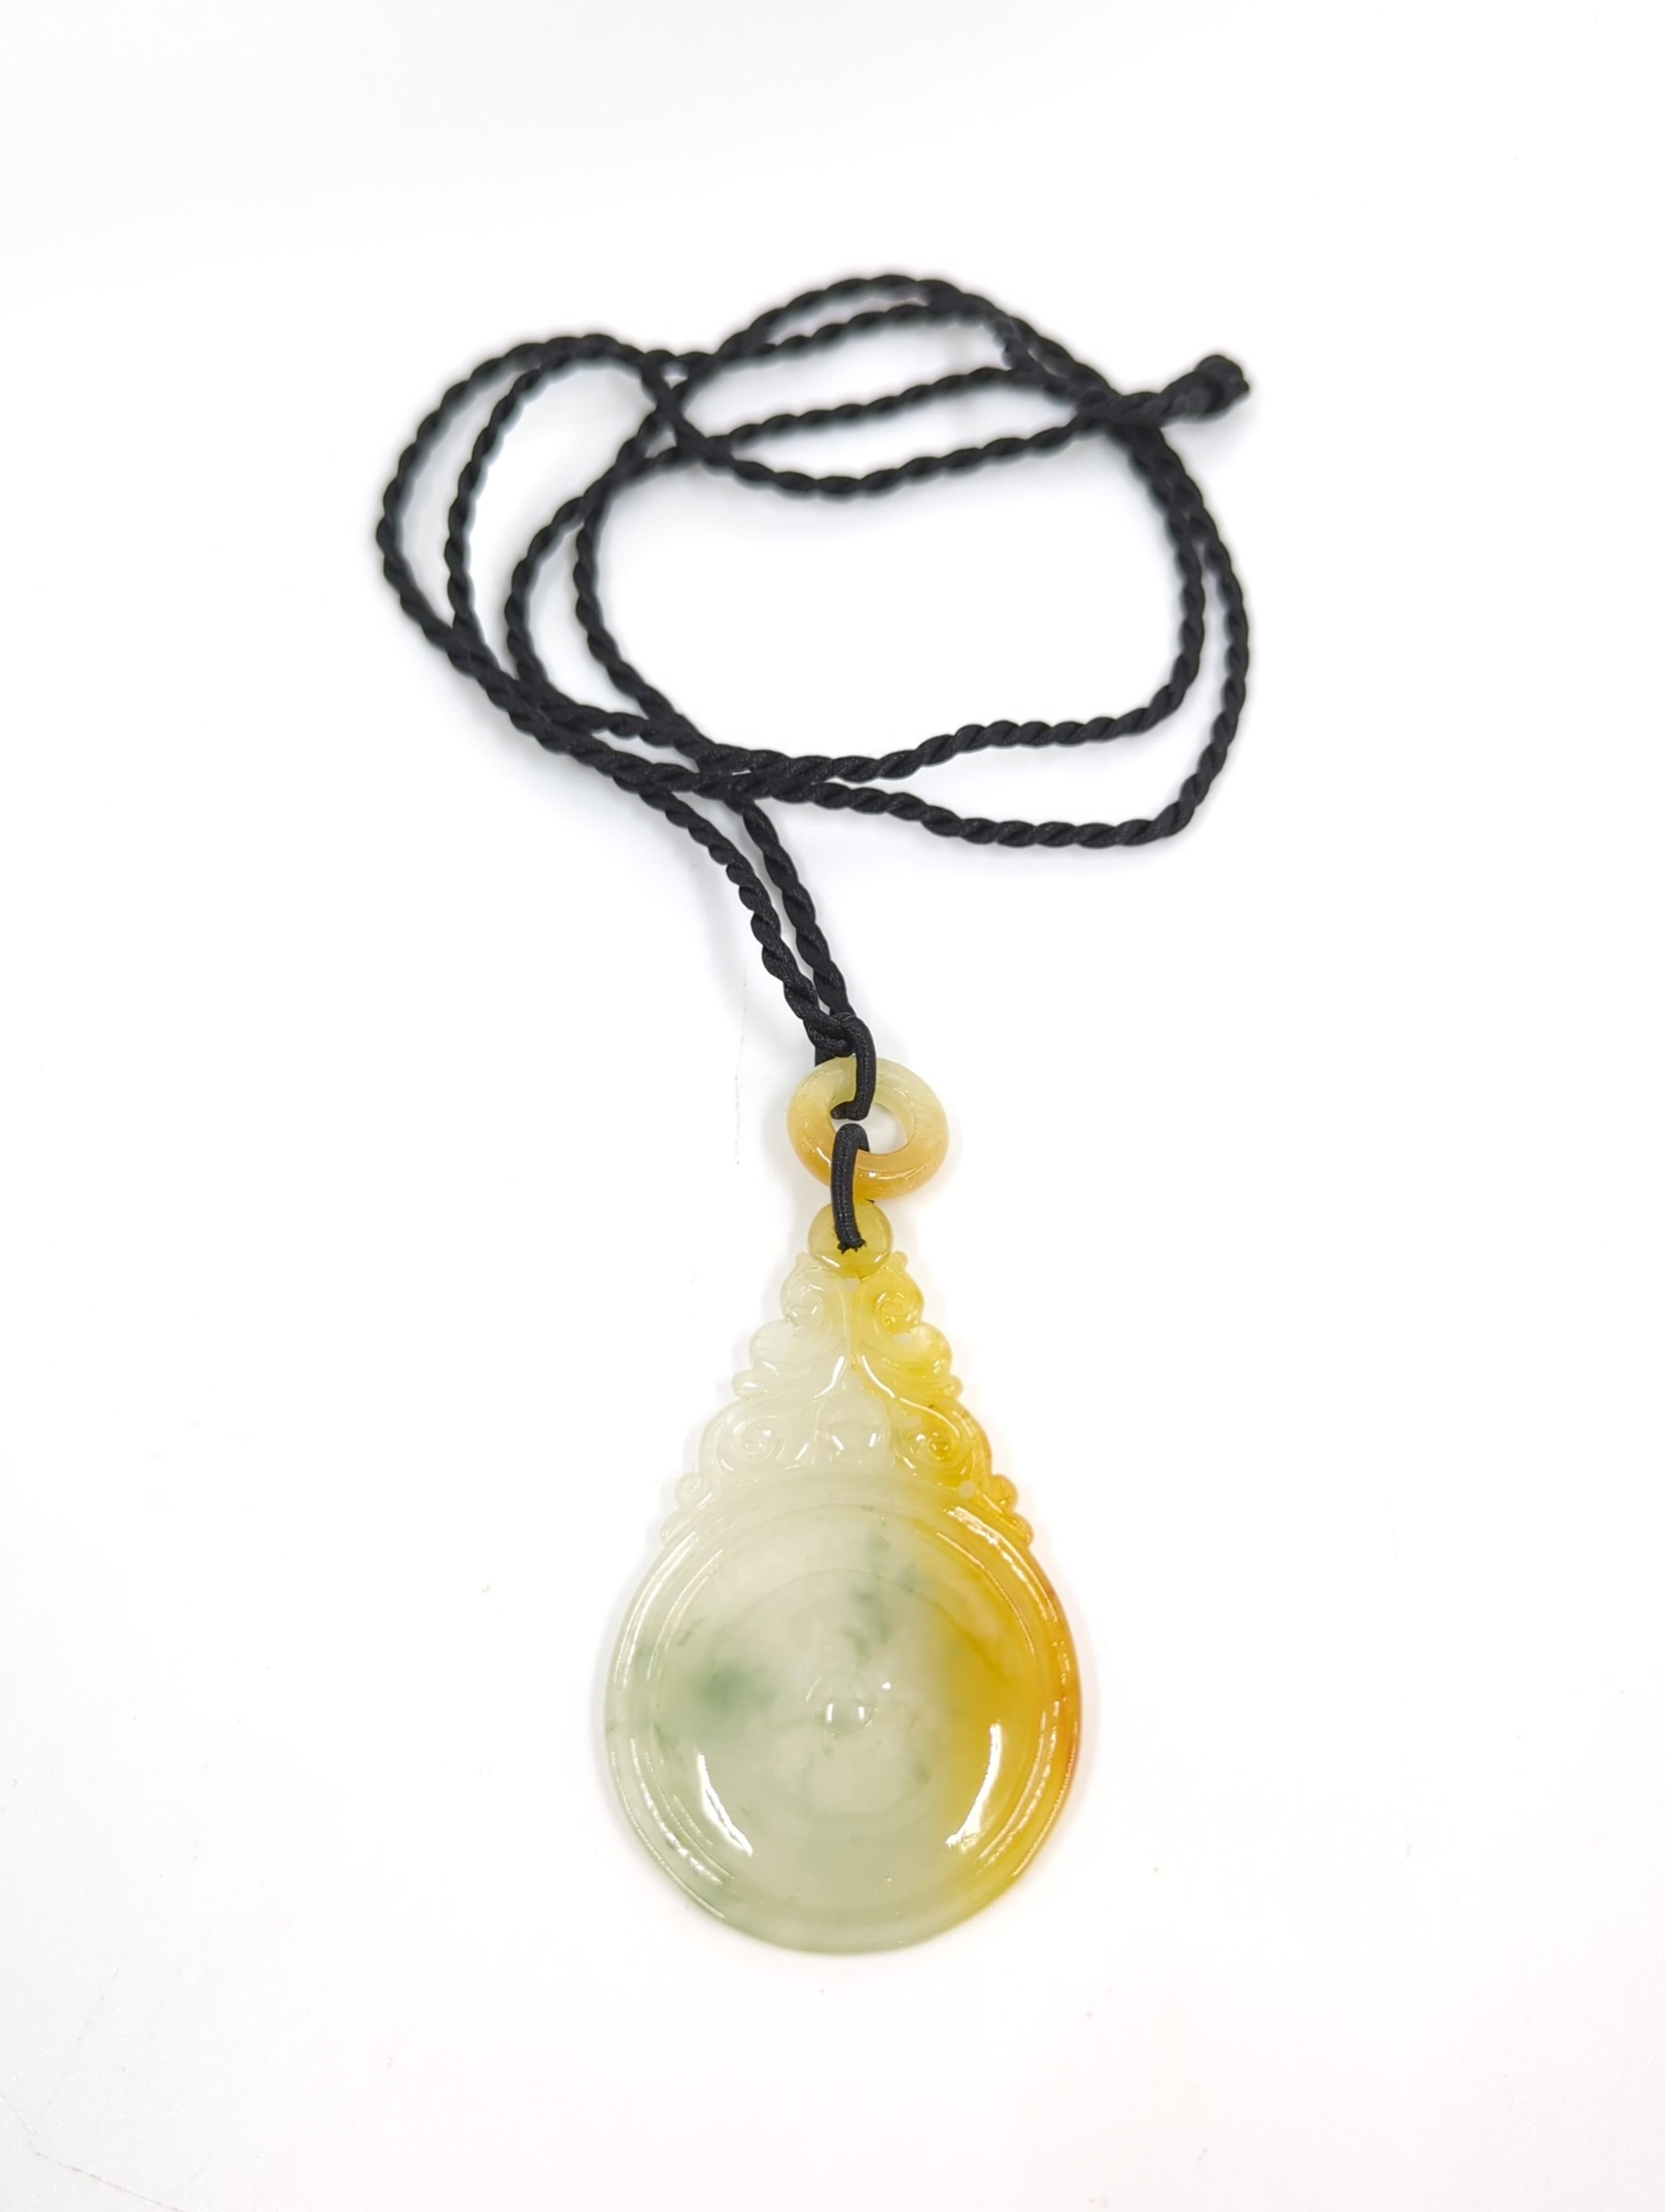 Fine Reticulated Honey Yellow Natural Jadeite Pendant Bead Necklace A-Grade  For Sale 4